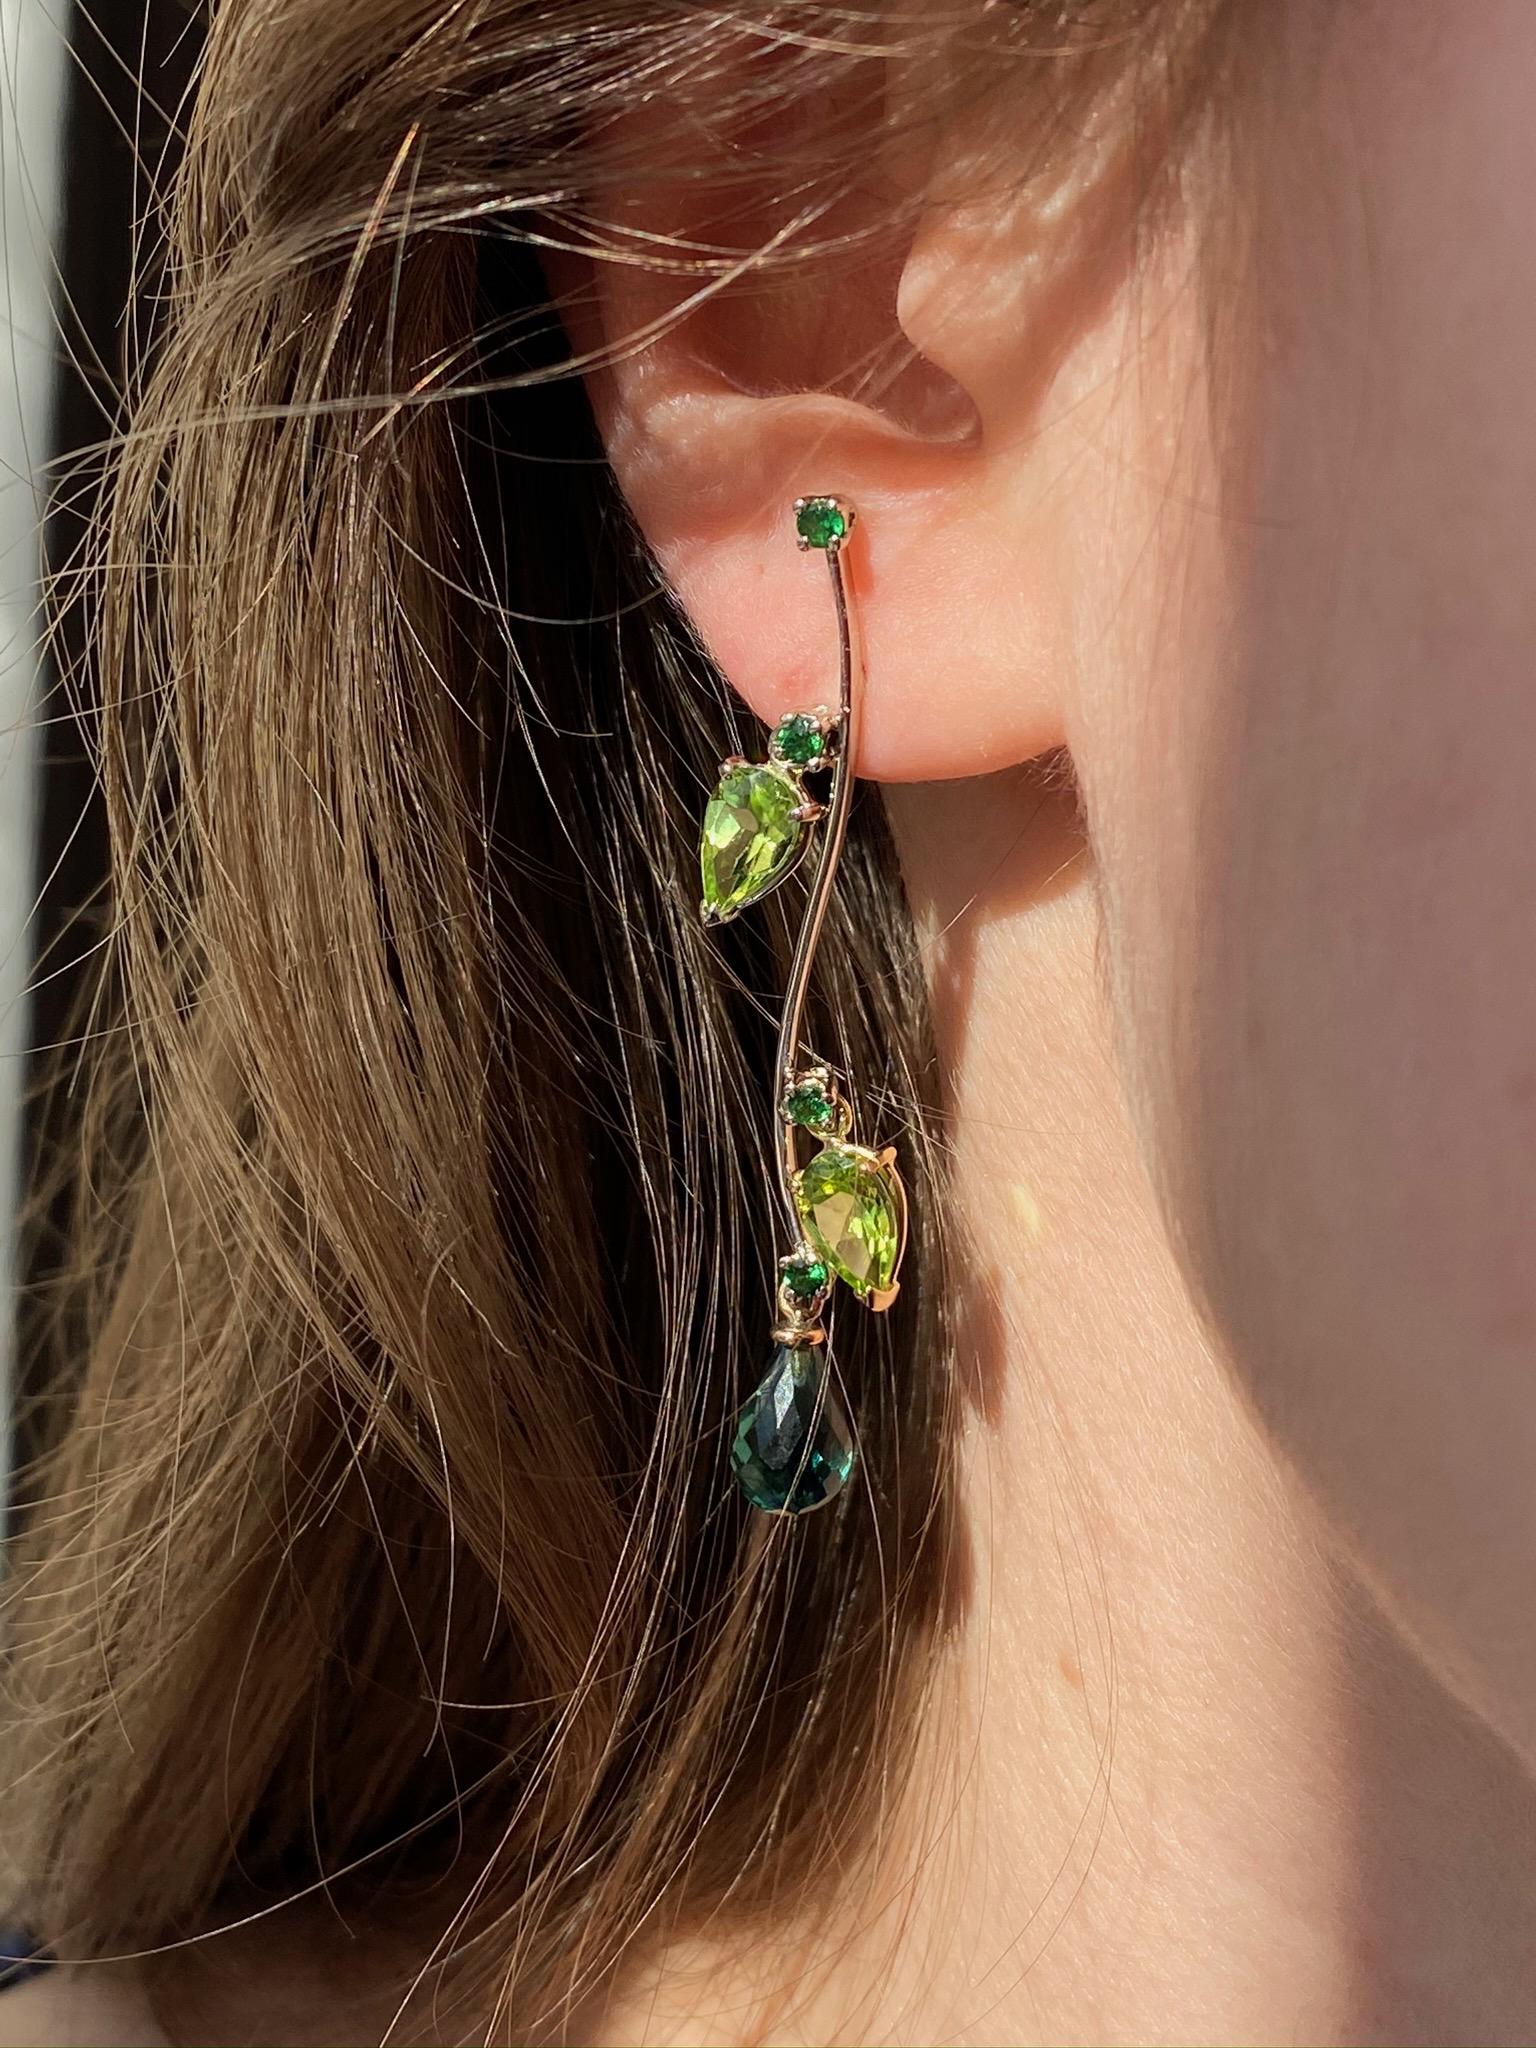 Rossella Ugolini Design Collection a Classy dangle earrings handcrafted in 18 Karats Gold with three shade of green colors:  Peridot pear cut,  Tsavorite round cut , green Tourmaline Briolet drops.  The branches of the trees of Villa Borghese in